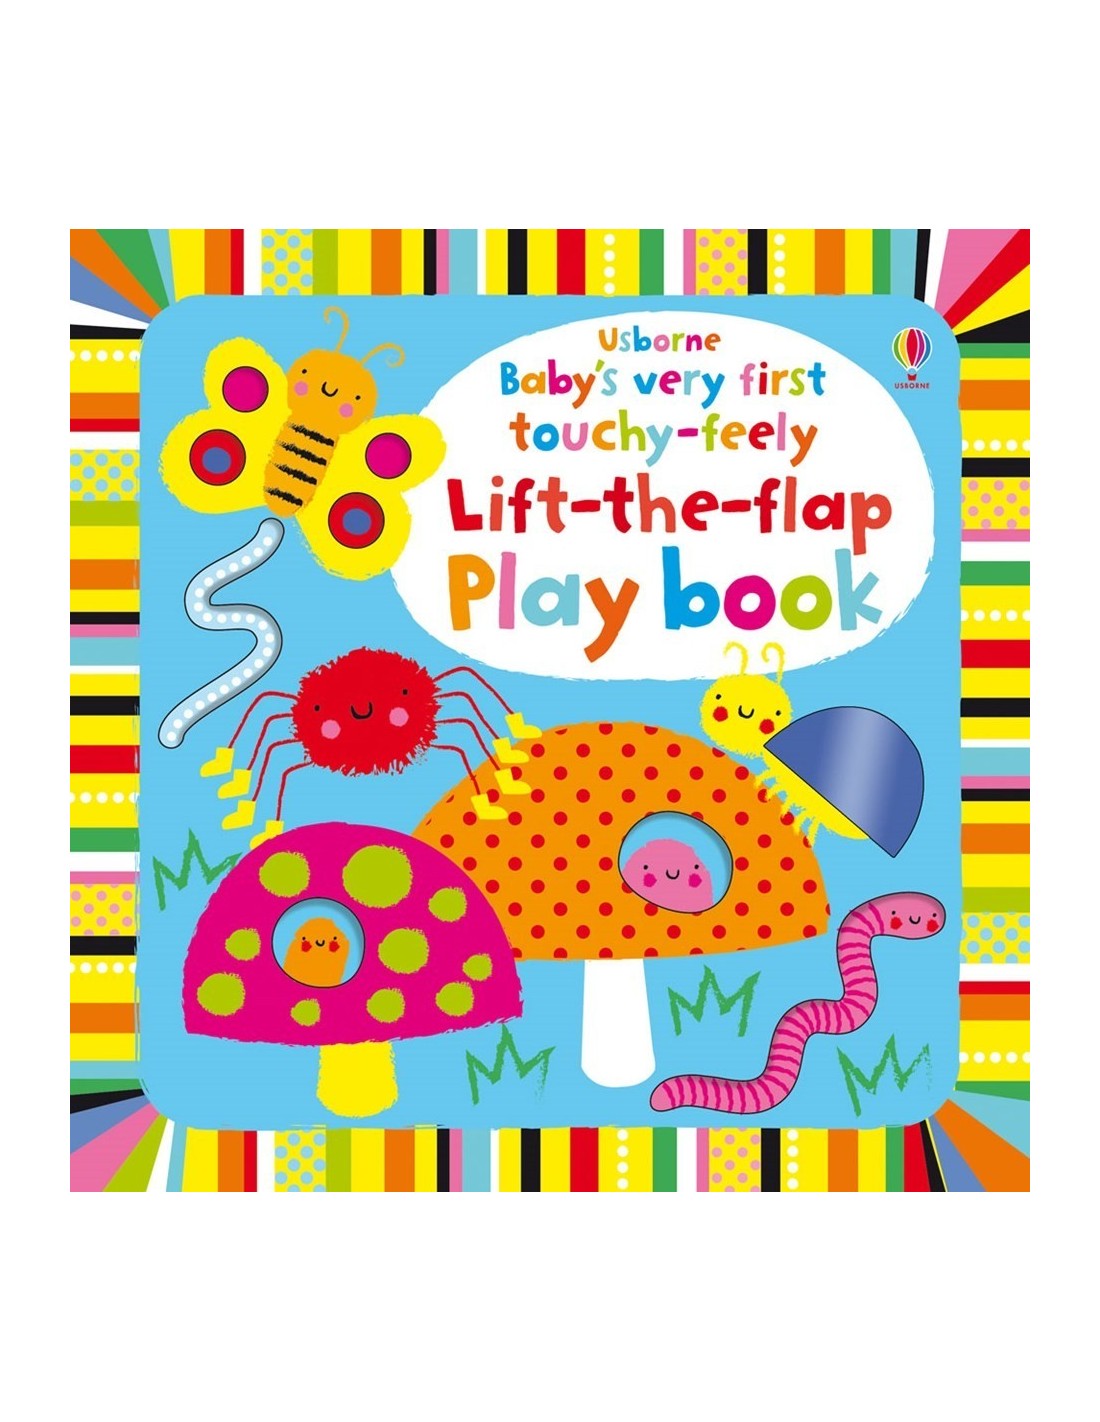 Baby's very first touchy-feely lift-the-flap play book